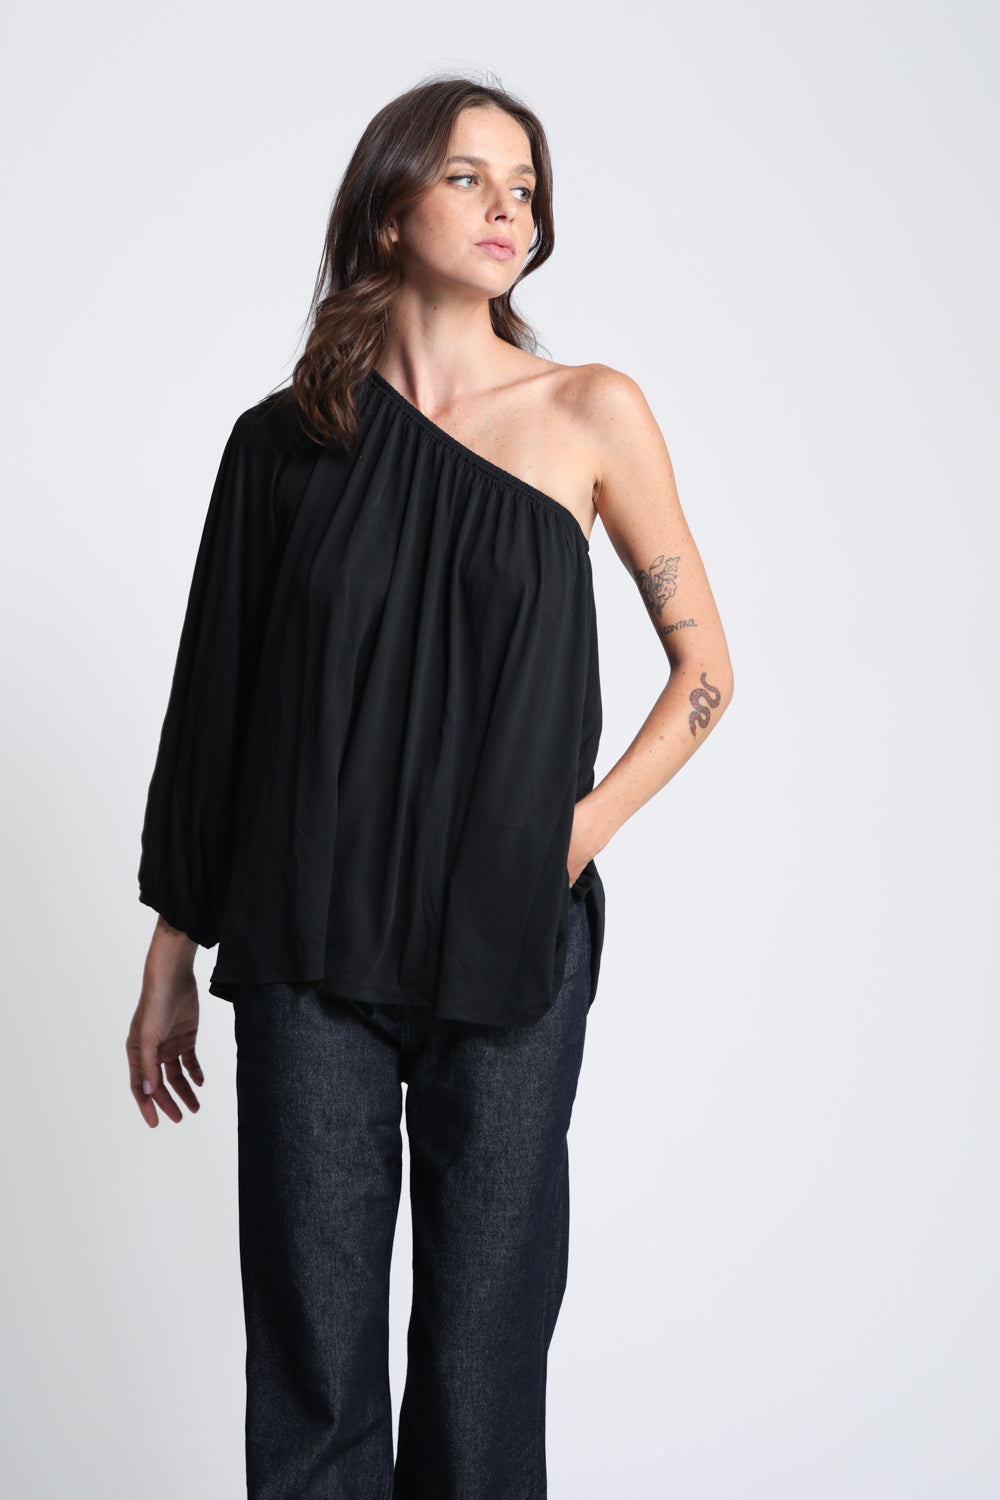 Discover Black Top